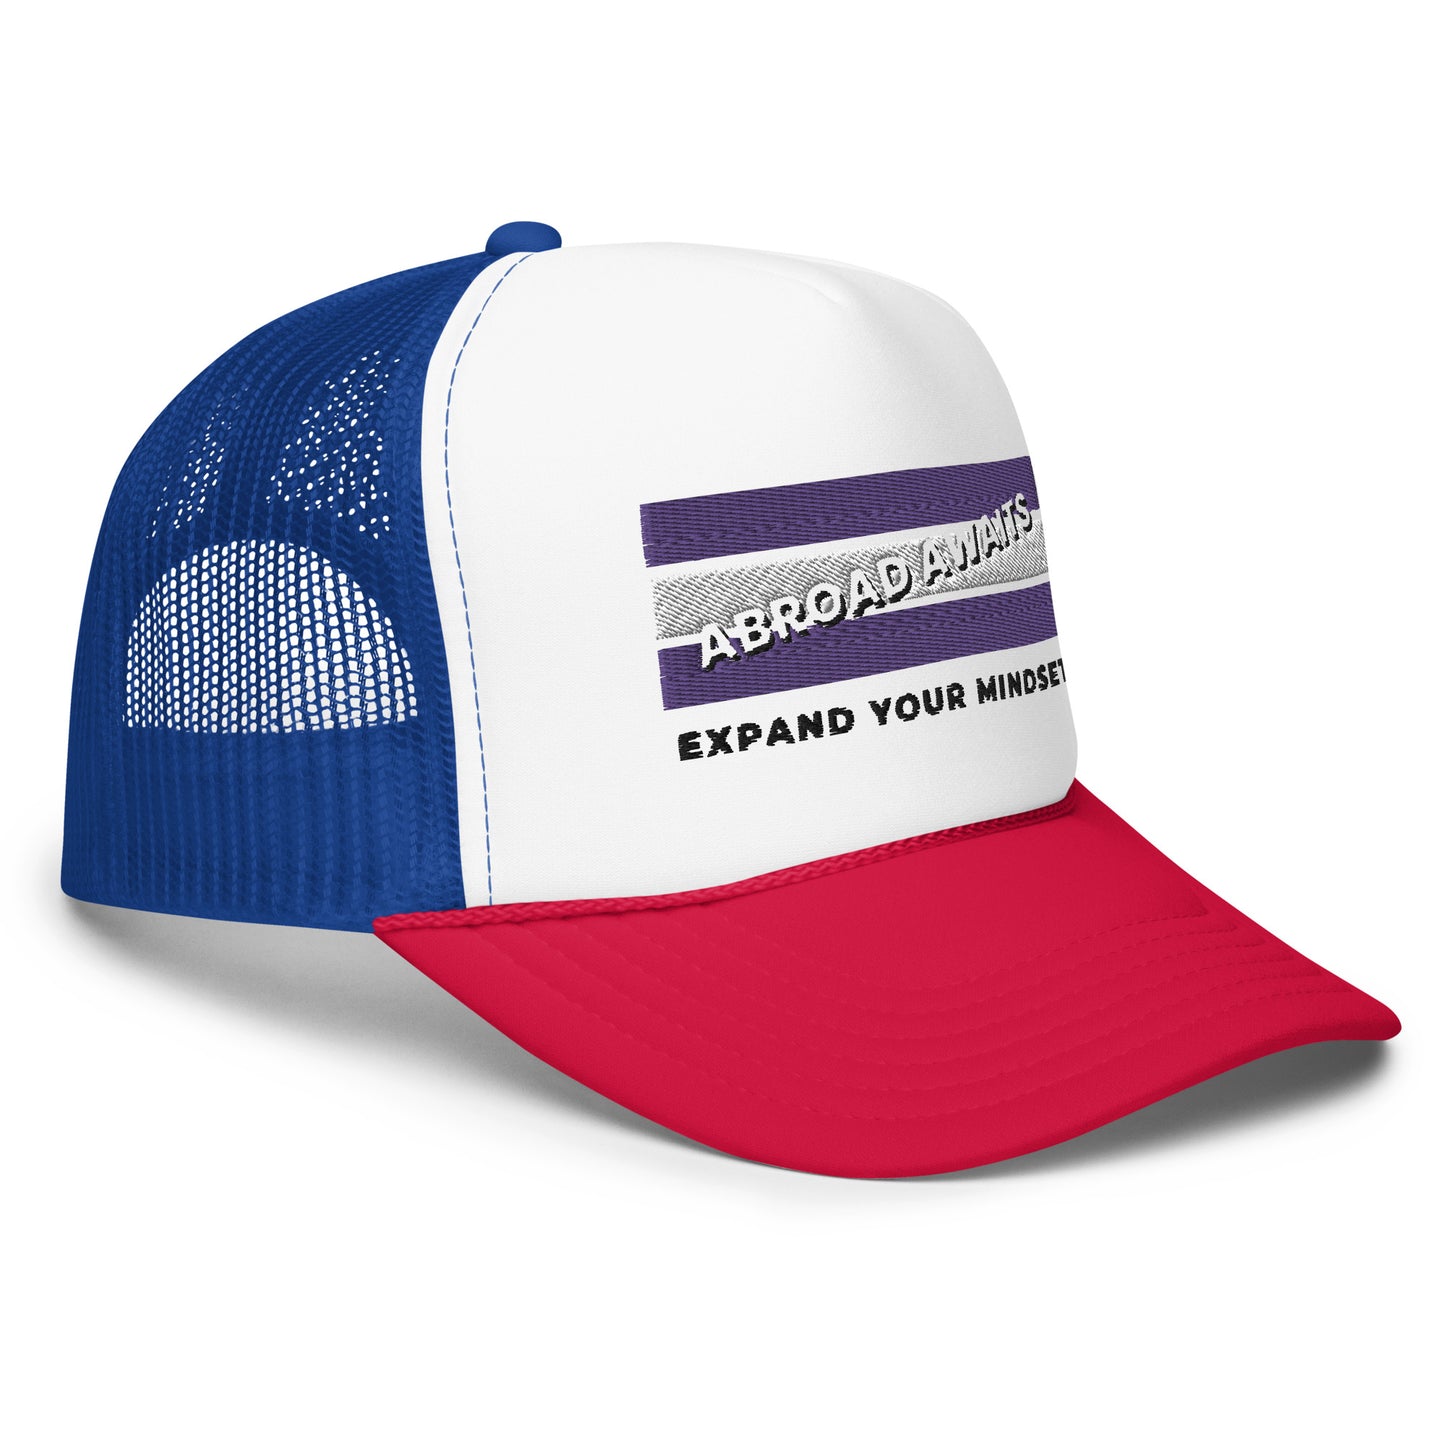 Foam trucker hat Abroad Awaits Expand Your Mindest